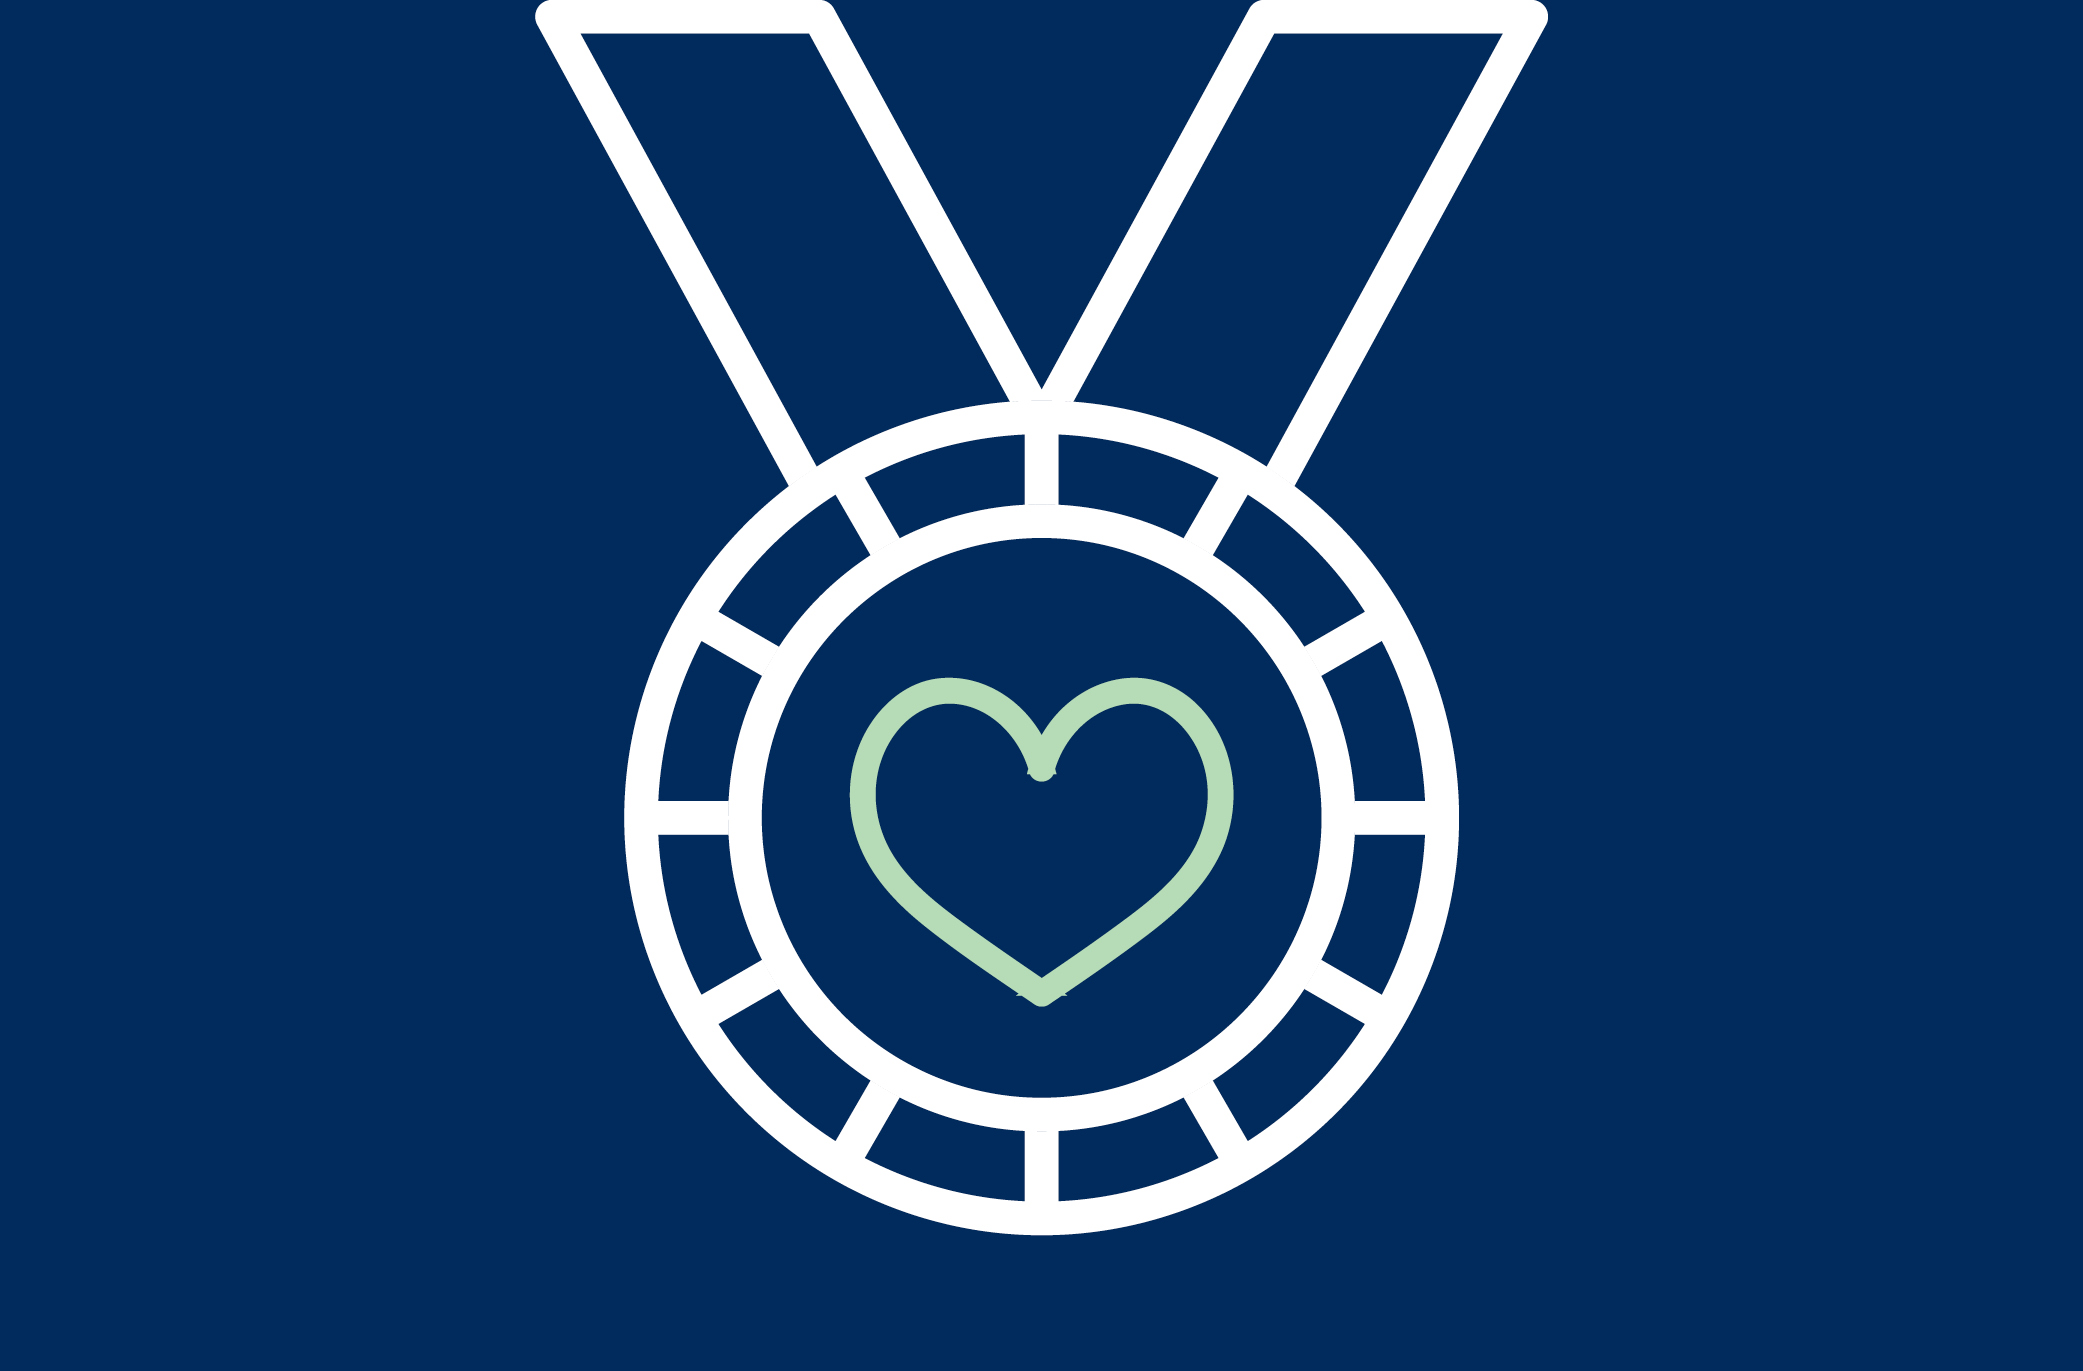 Illustration of a medal with a heart inside